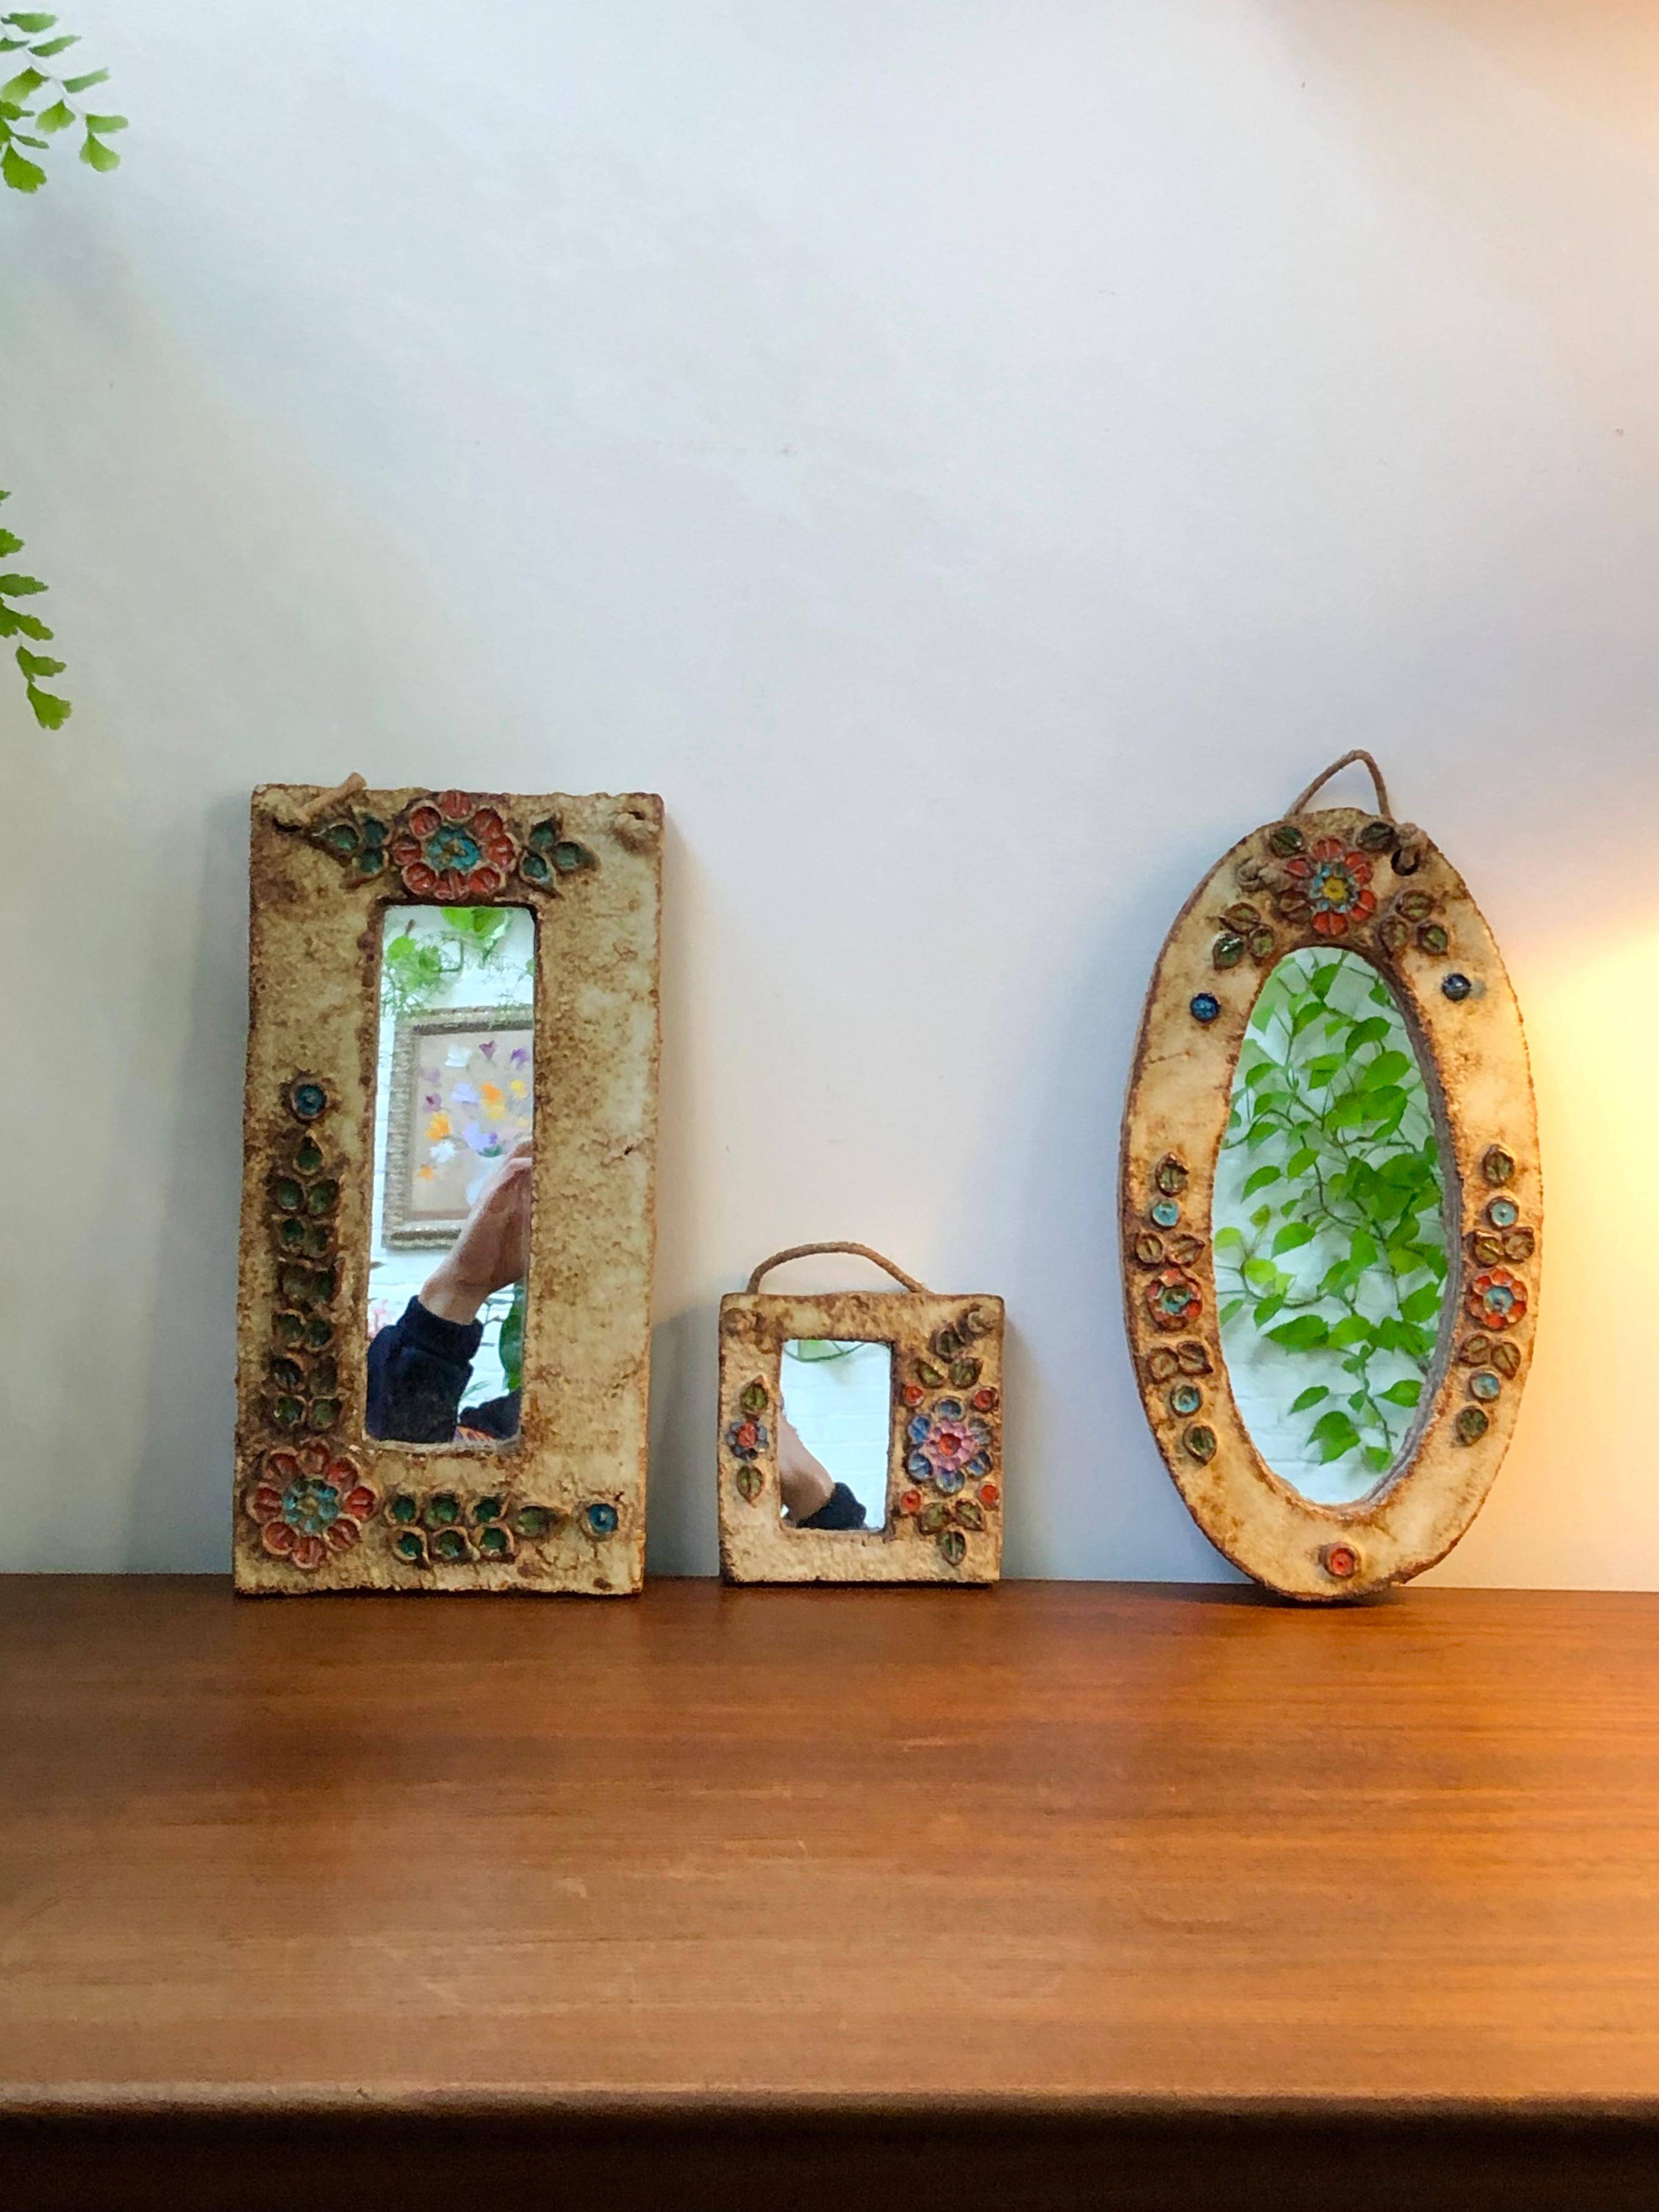 Ceramic flower-motif wall mirror with glazed leaves attributed to La Roue, Vallauris, France (circa 1960s). A charming, decorative small mirror with rustic but colourful details surrounding the oval mirror. In good vintage condition showing